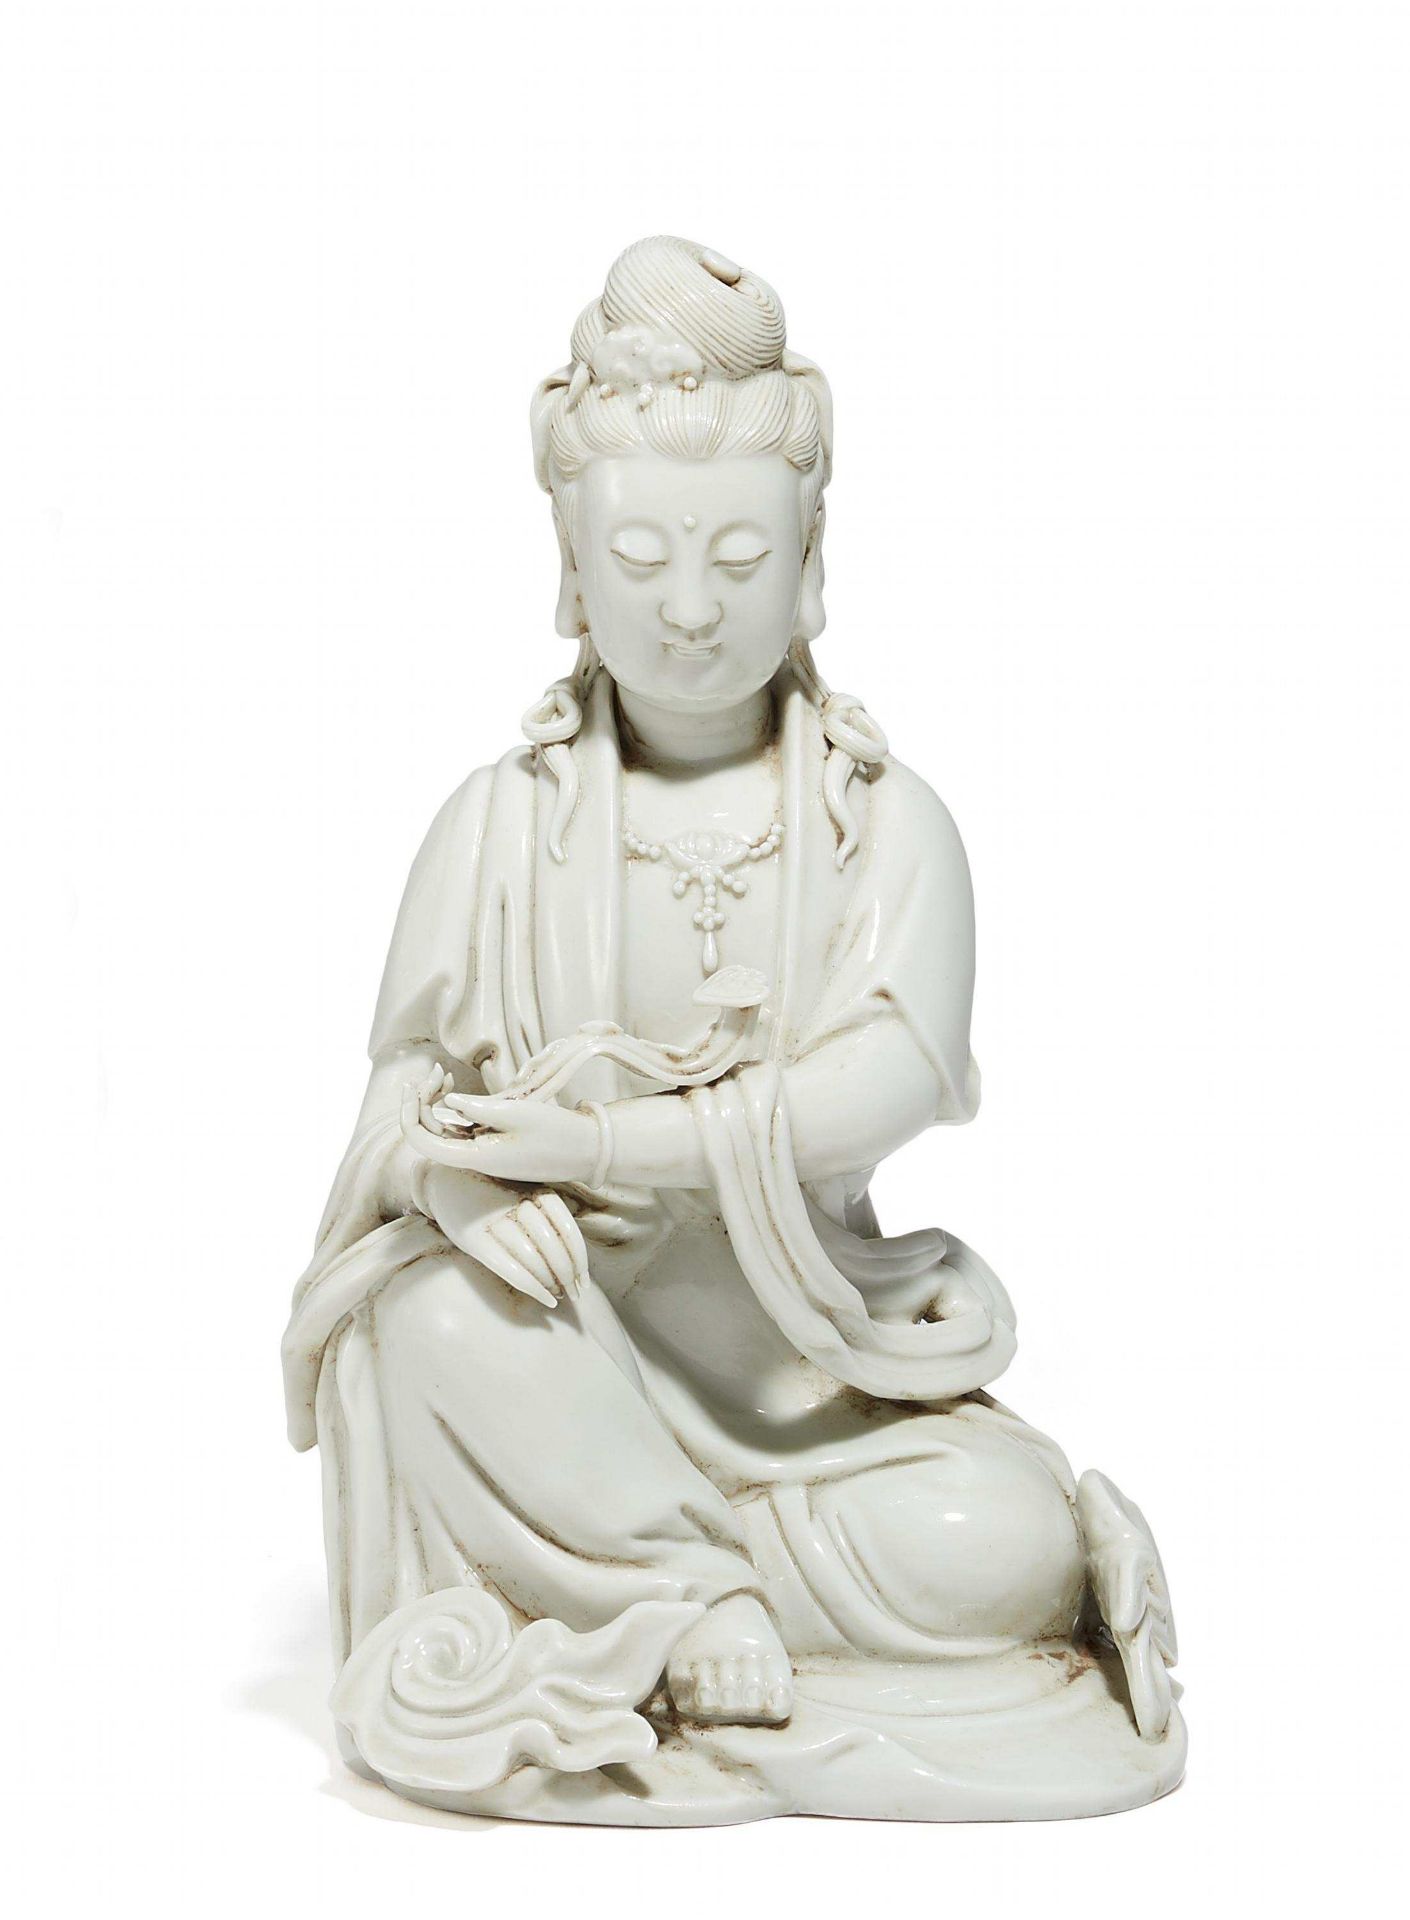 GUANYIN WITH RUYI. China. Qing dynasty. 18th c. Blanc de Chine porcelain. Sitting in lalitâsana with